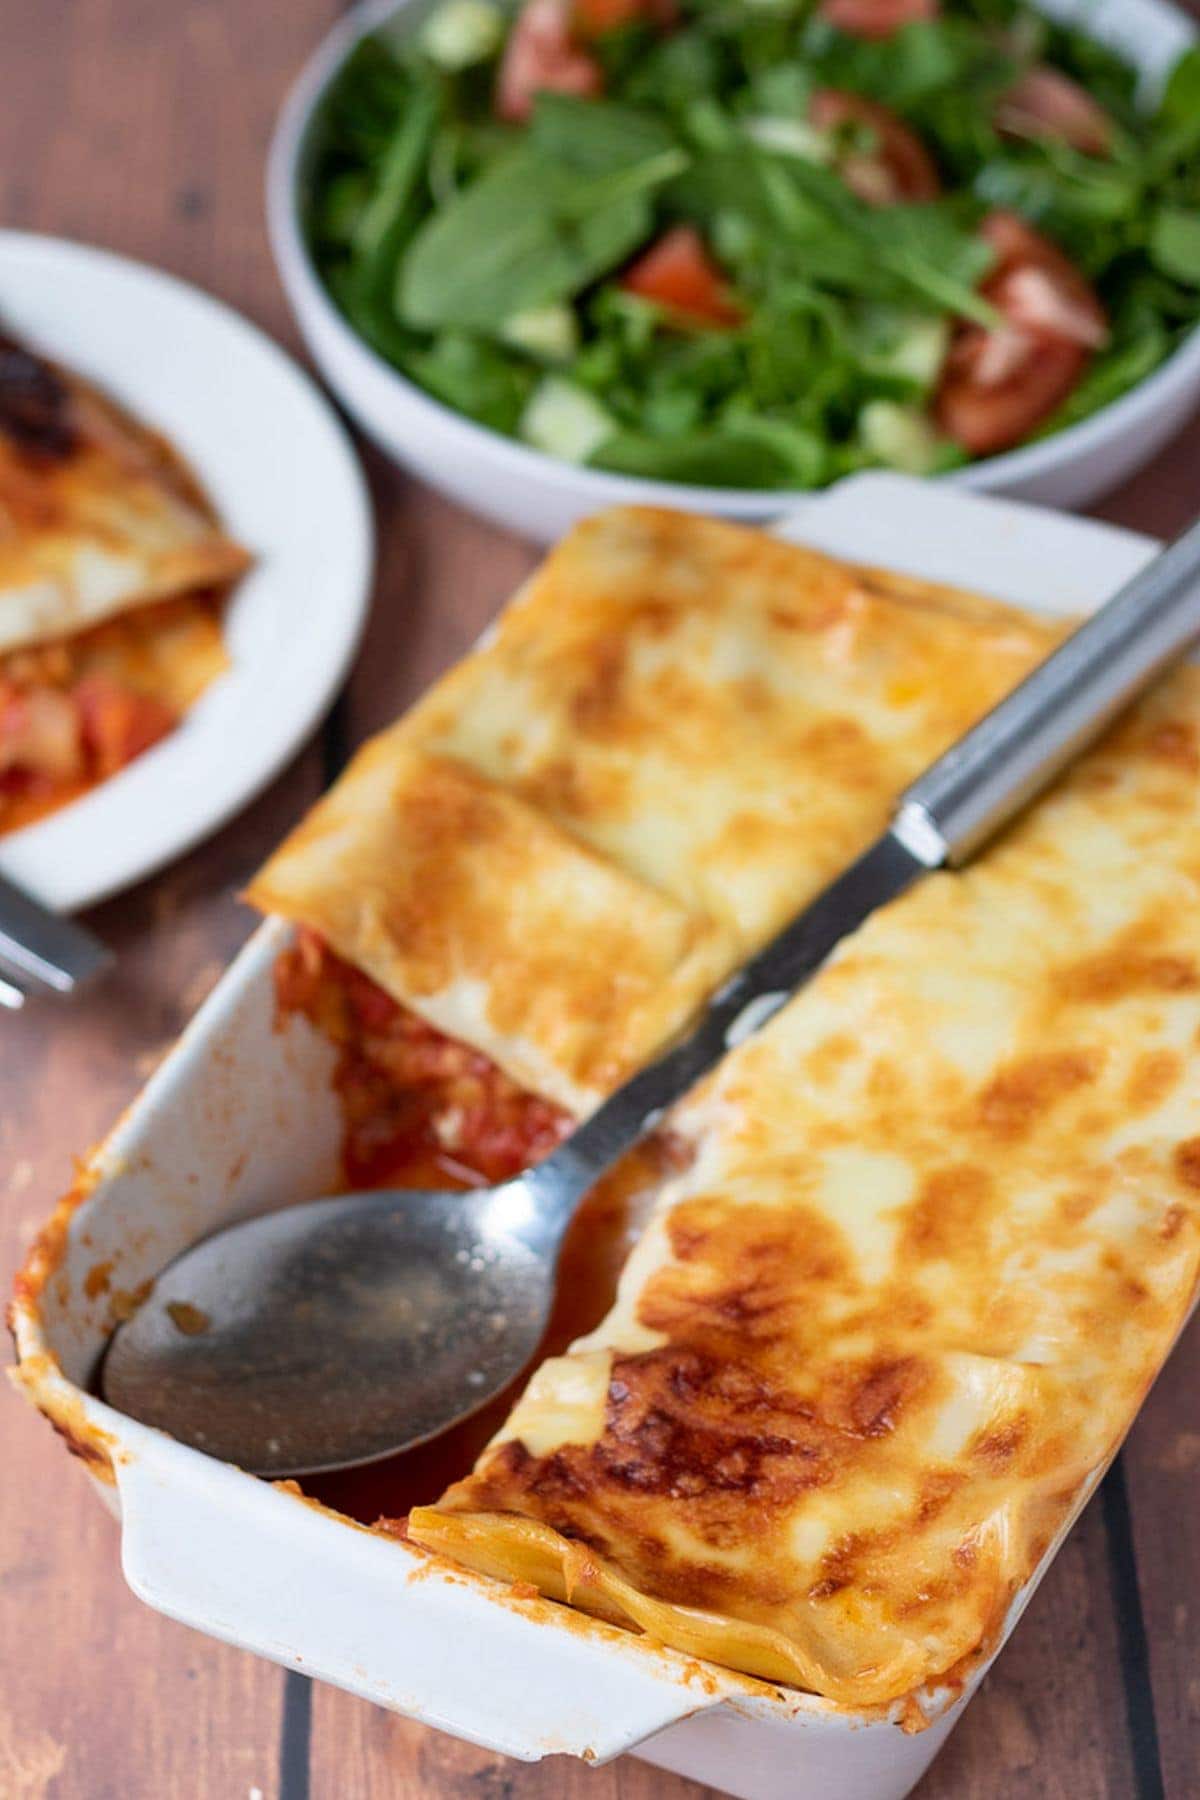 Red lentil lasagne with a portion taken out of one corner. A spoon in its place and a side salad in the background.